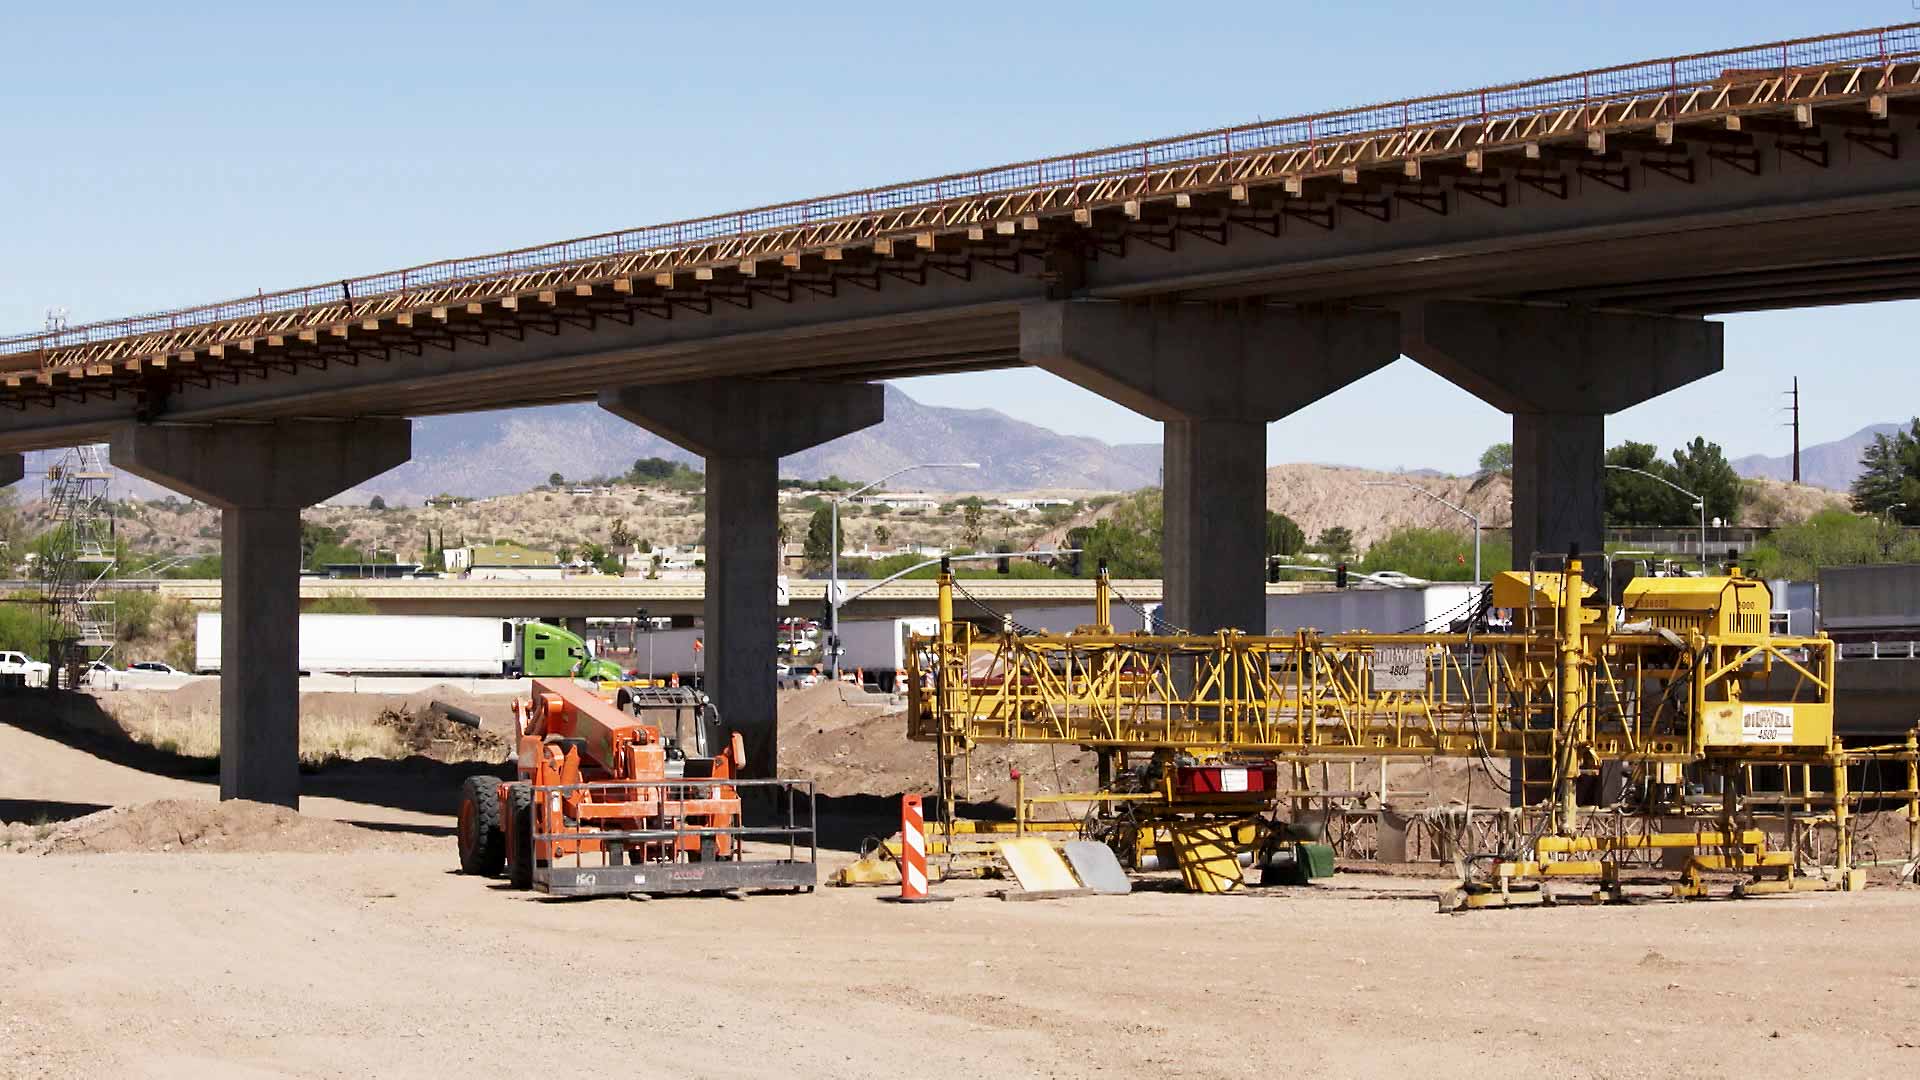 The site of construction on new flyover ramps that will connect State Route 189 to Interstate 19 in Nogales. April 30, 2021. 